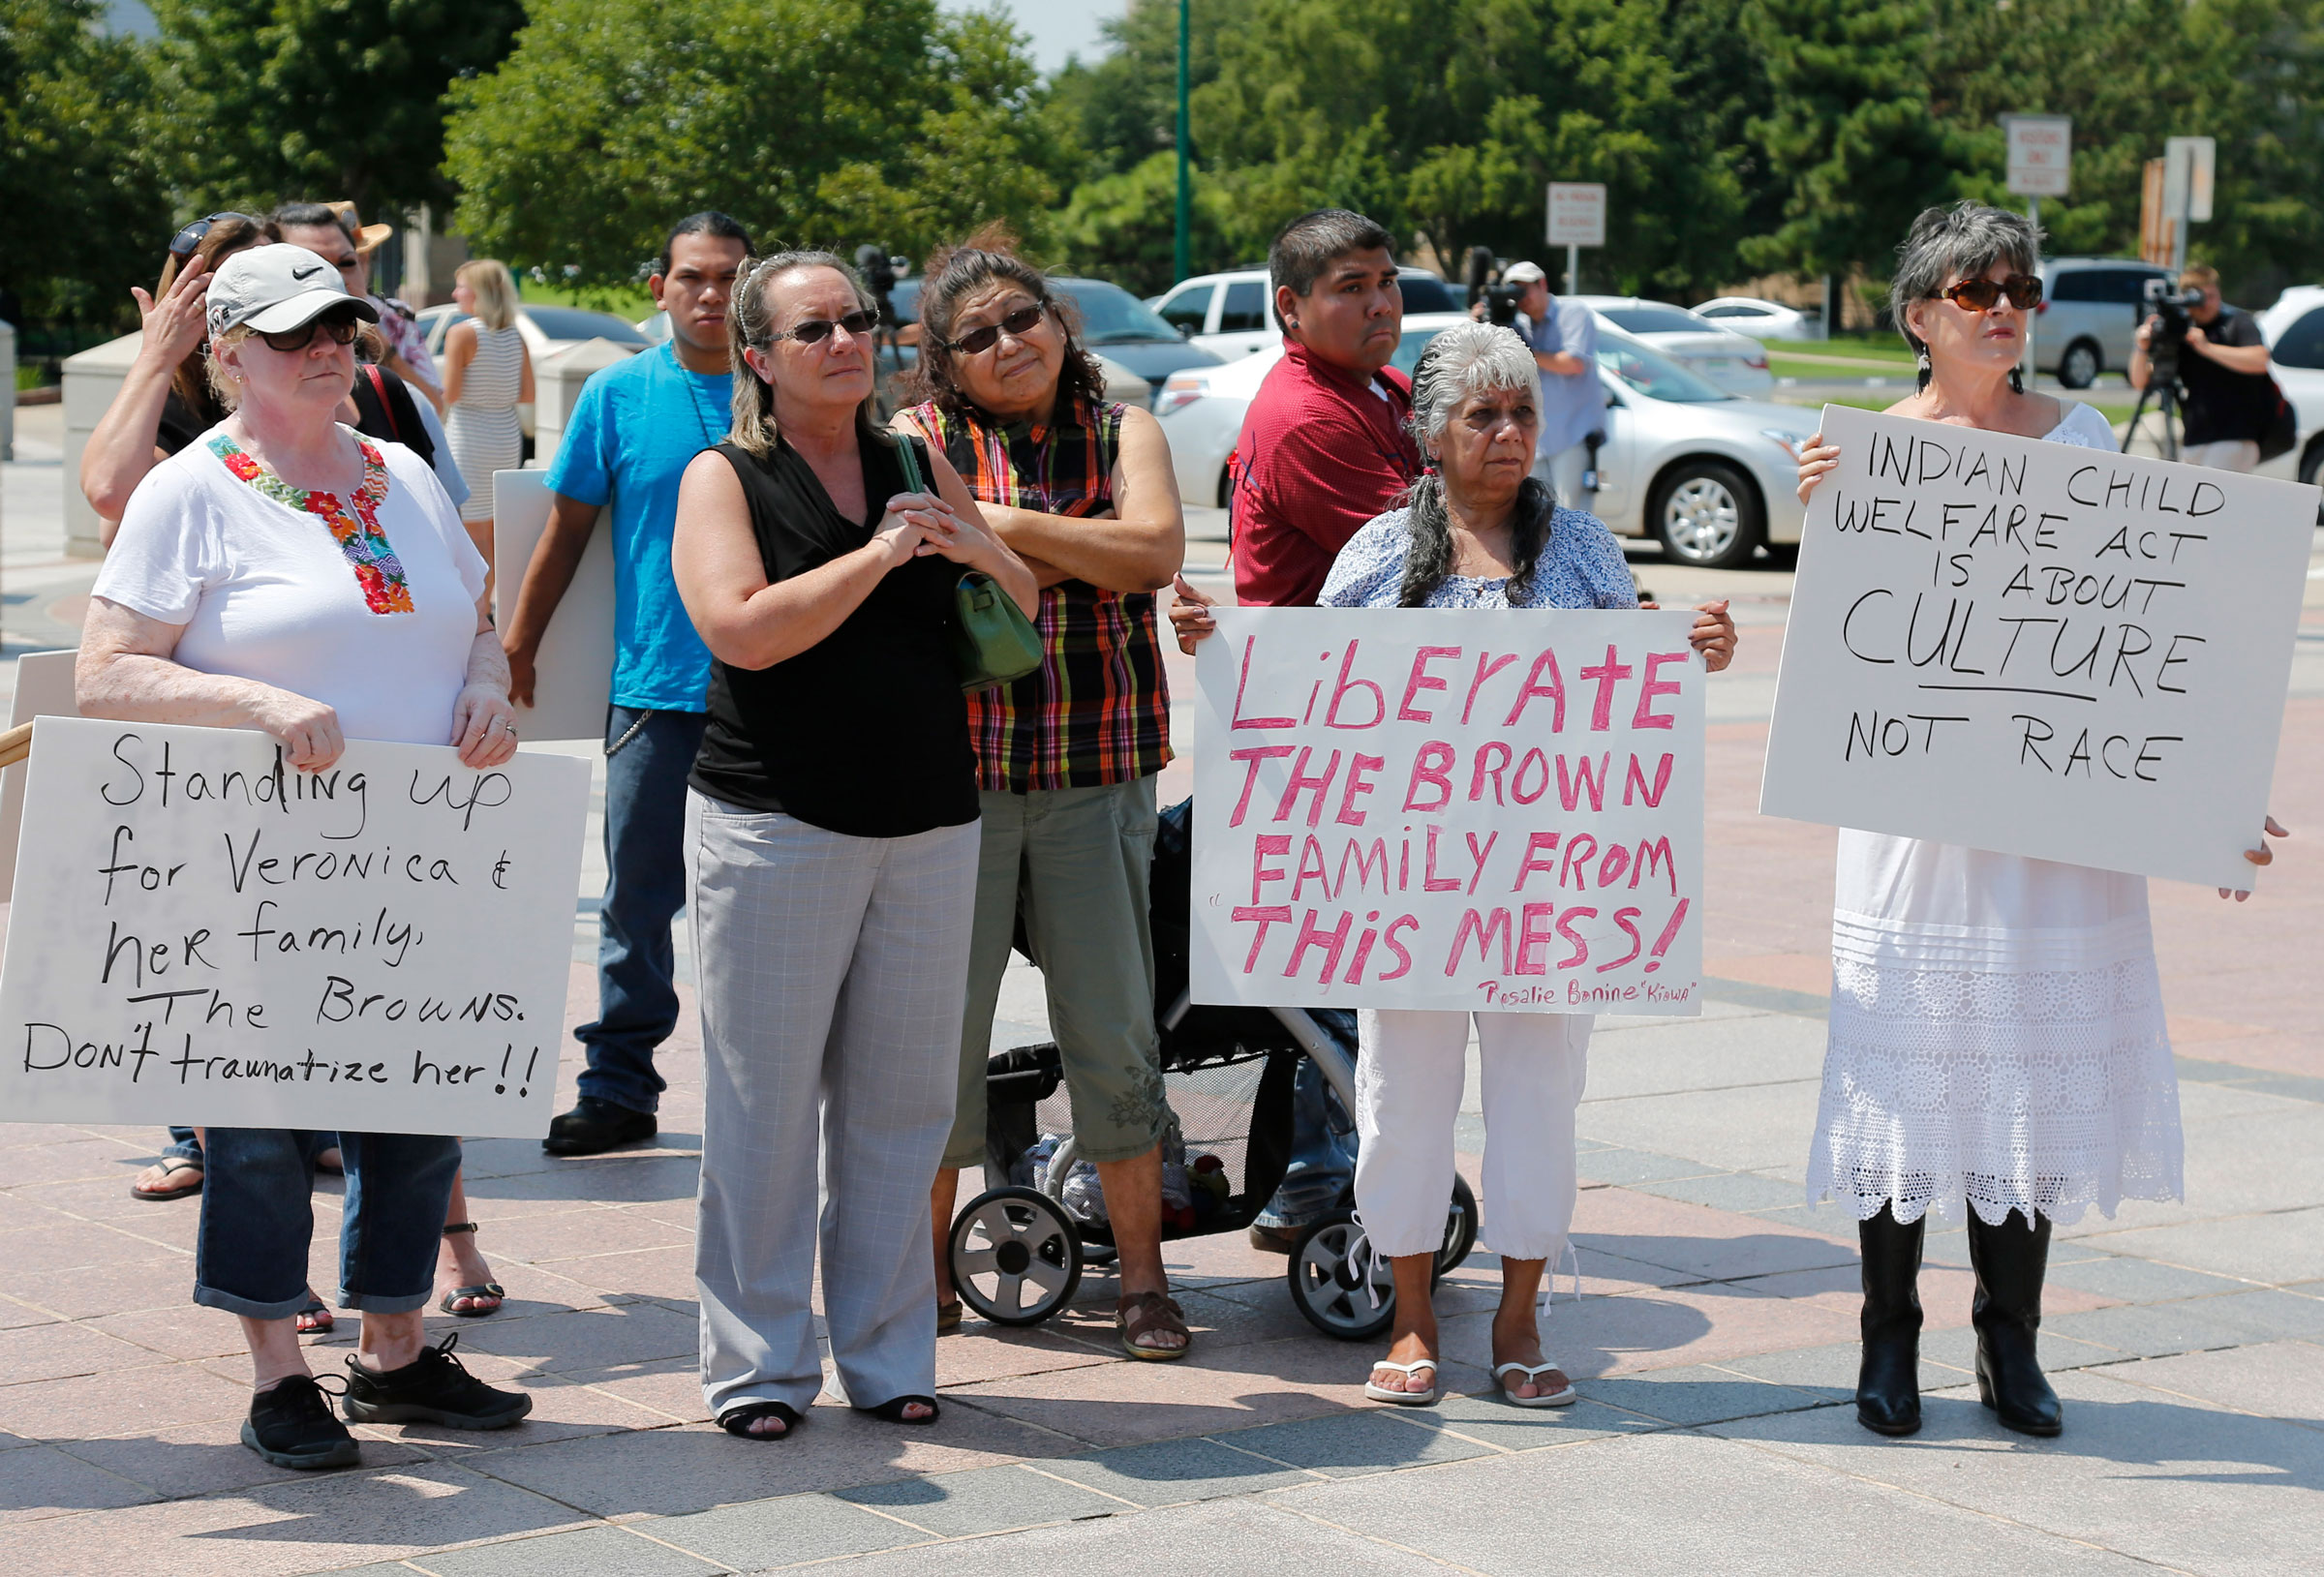 Participants listen during a rally in support of the Indian Child Welfare Act, in Oklahoma City, on Aug. 19, 2013